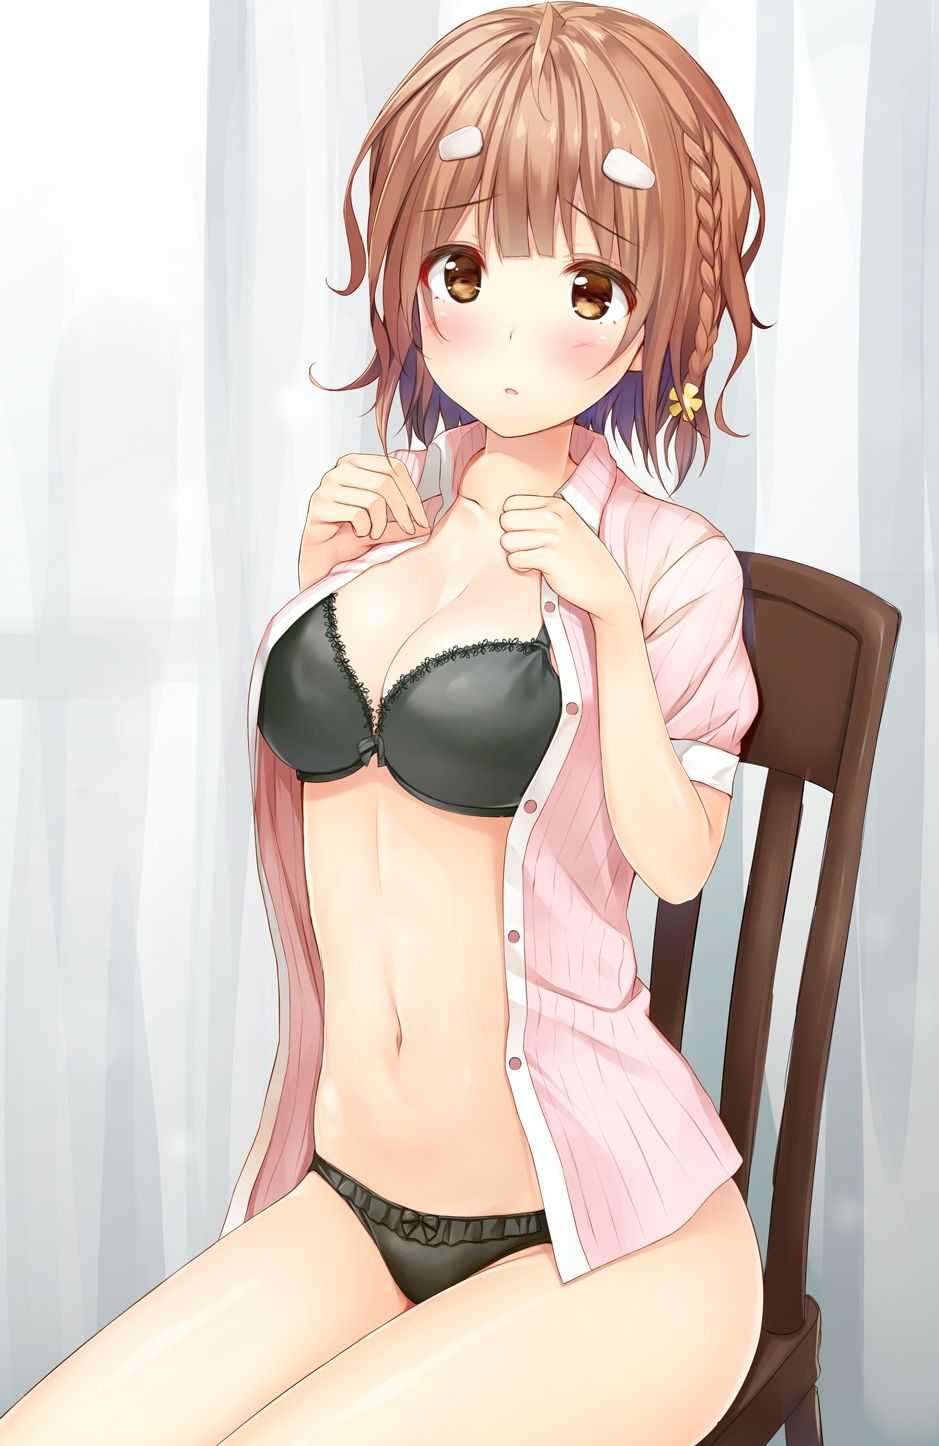 [2nd] Next erotic image of a cute girl Masashiku is shy expression 15 [embarrassed face] 16